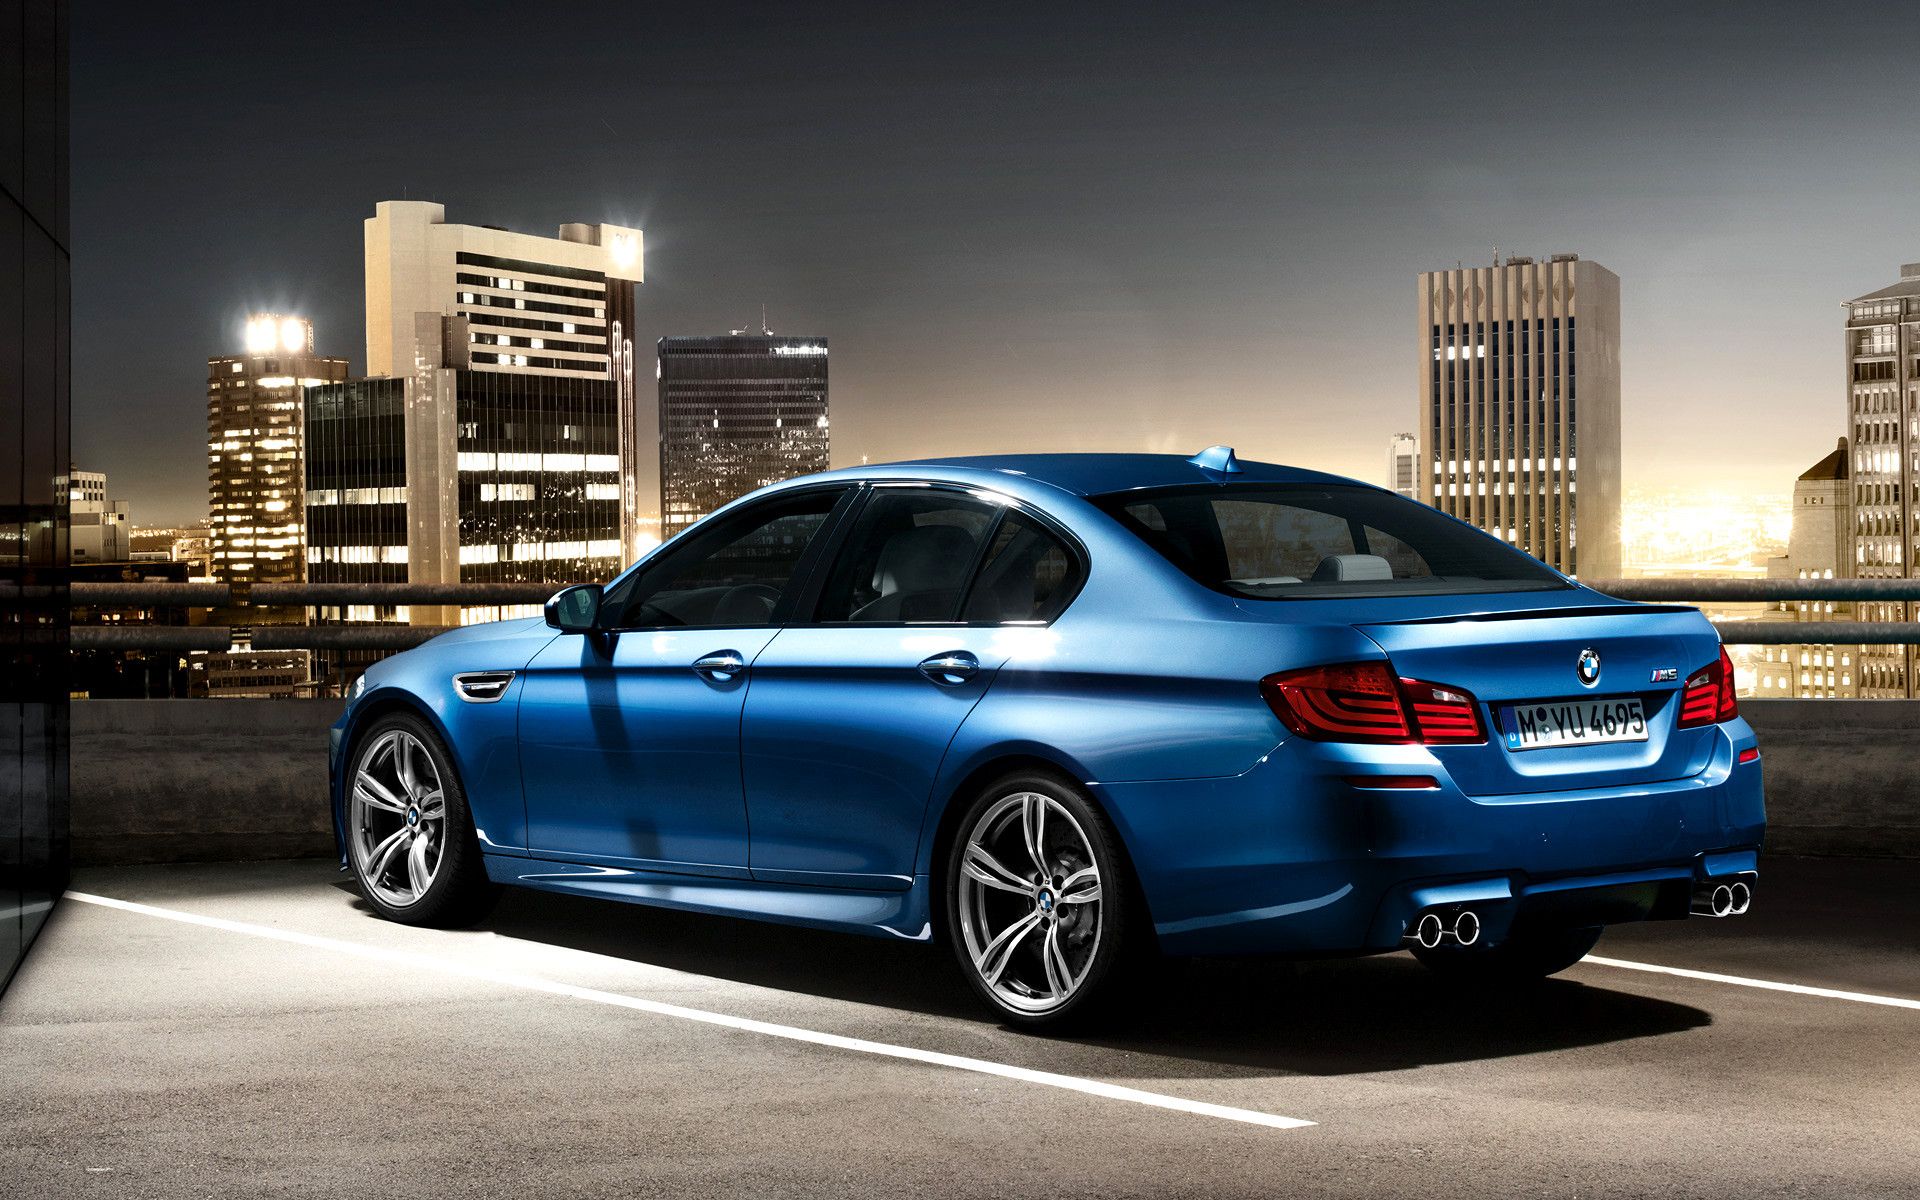 Collection of Bmw M5 Wallpaper on HDWallpapers